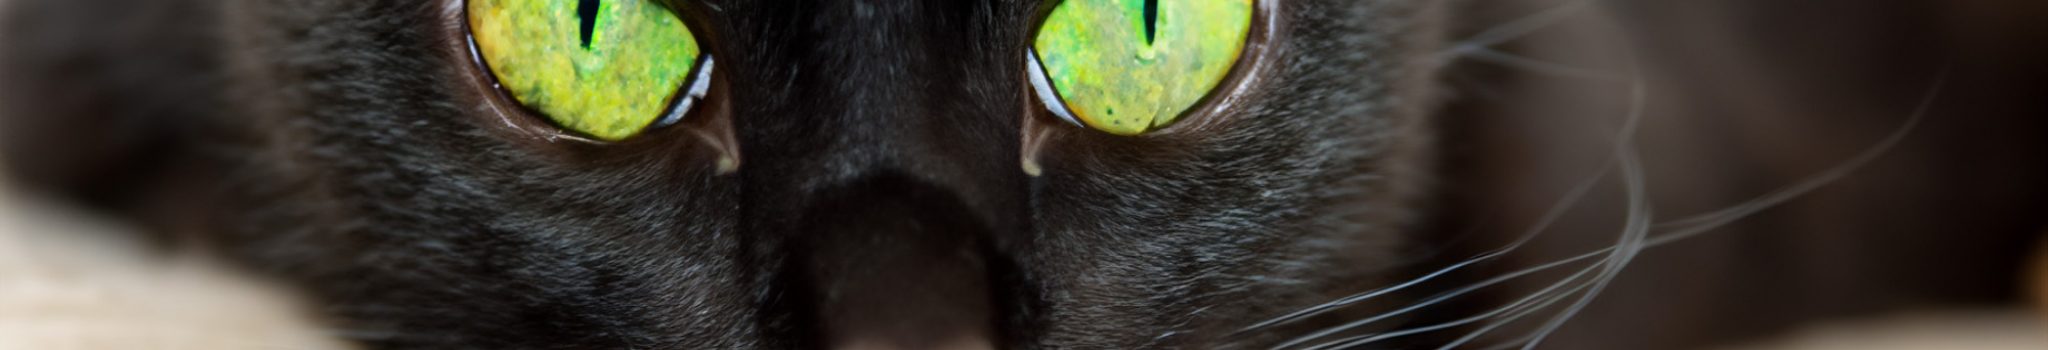 Black Cat with Green Eyes 2